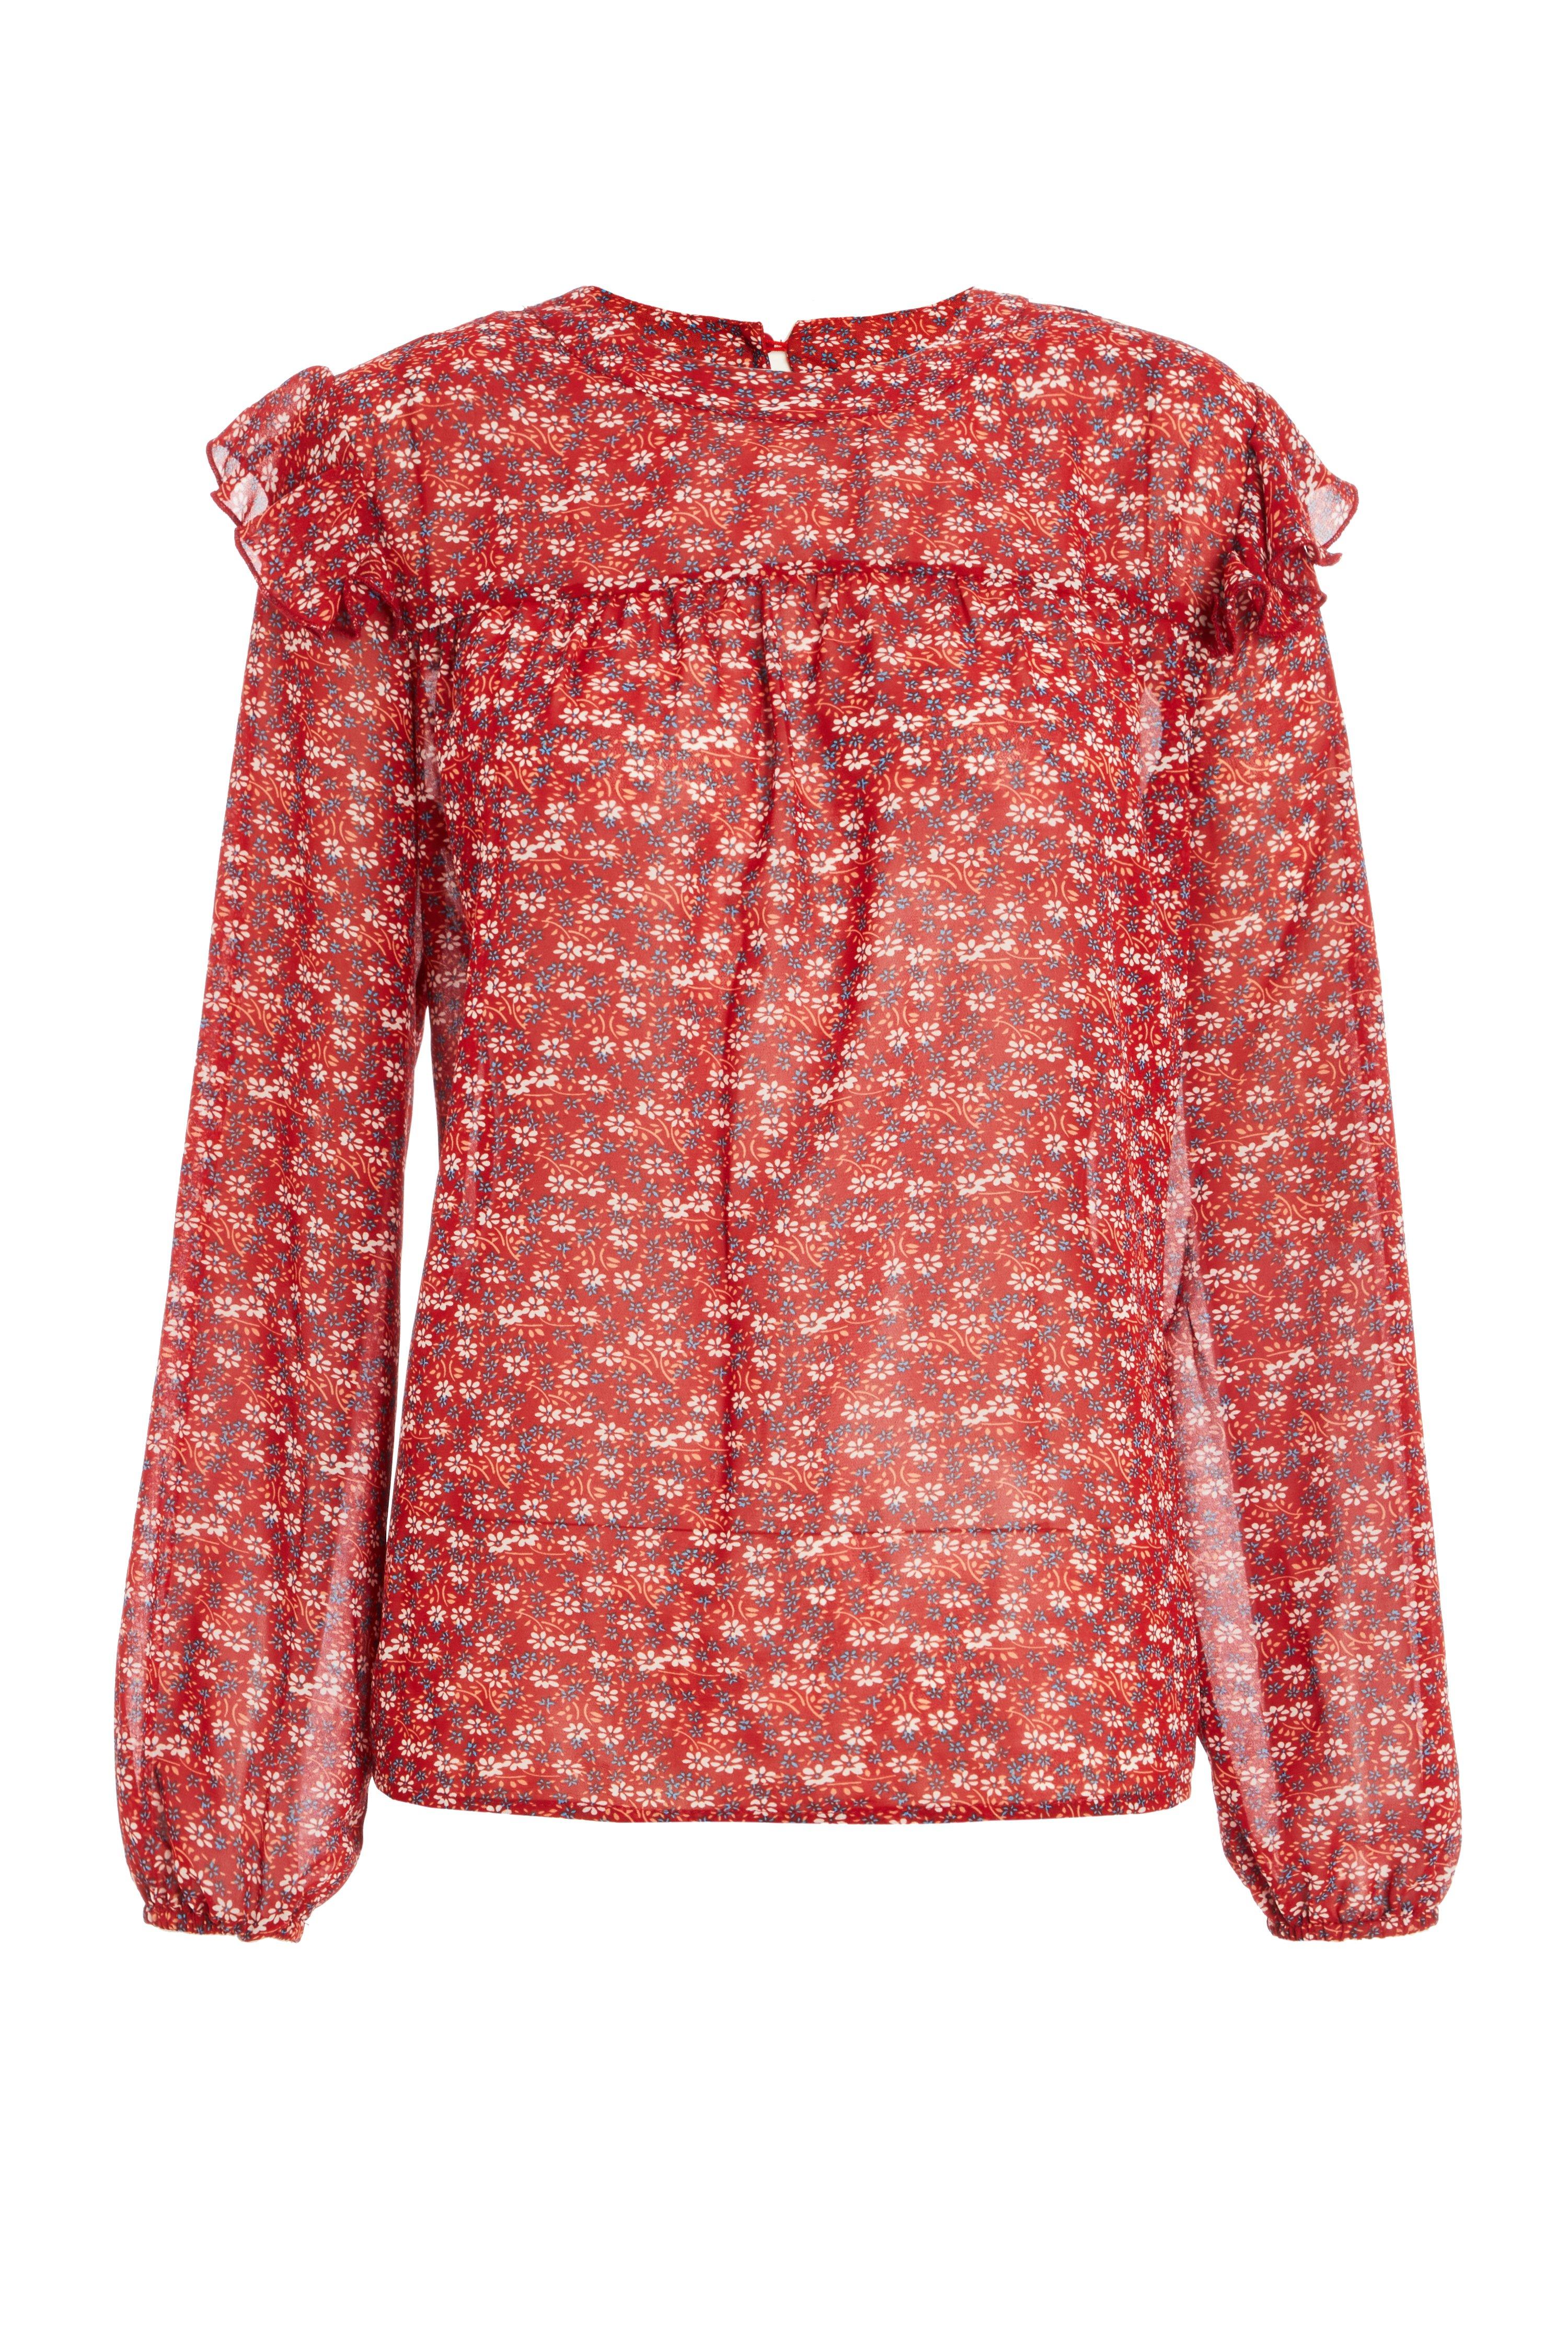 Berry Floral Chiffon Blouse - Quiz Clothing